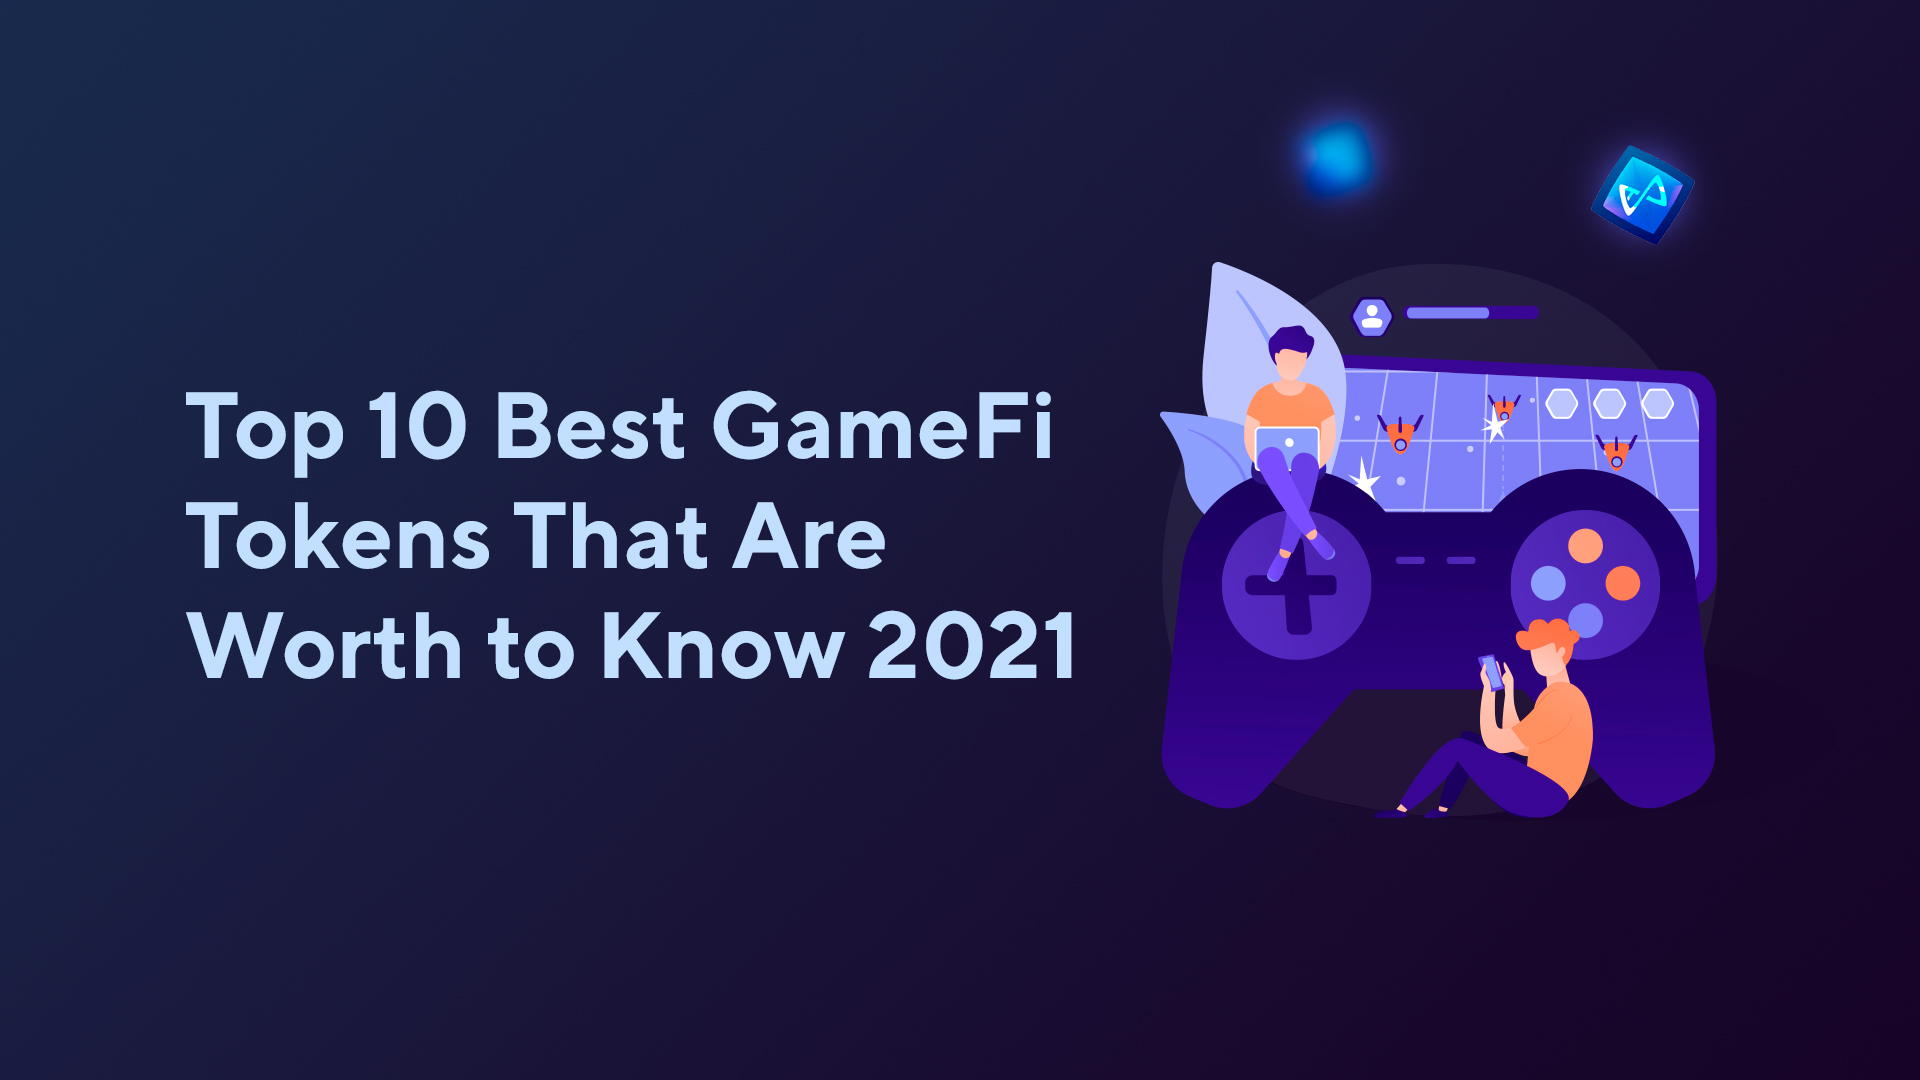 Top 10 Best GameFi Tokens That Are Worth to Know 2021